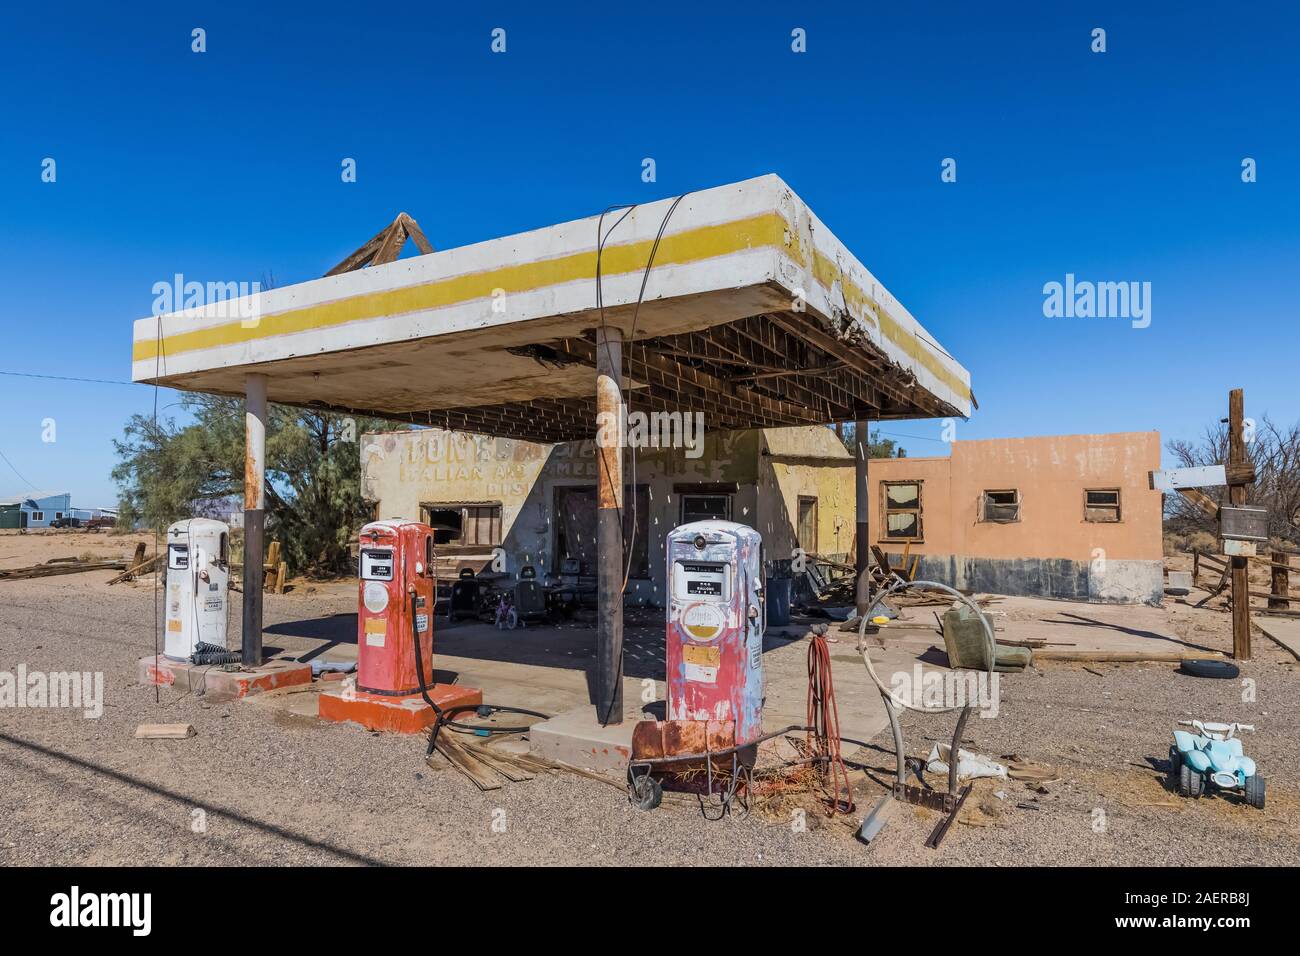 Whiting Brothers gas station, closed in 1968, at Newberry Springs along Route 66 in California, USA [No property release; available for editorial lice Stock Photo